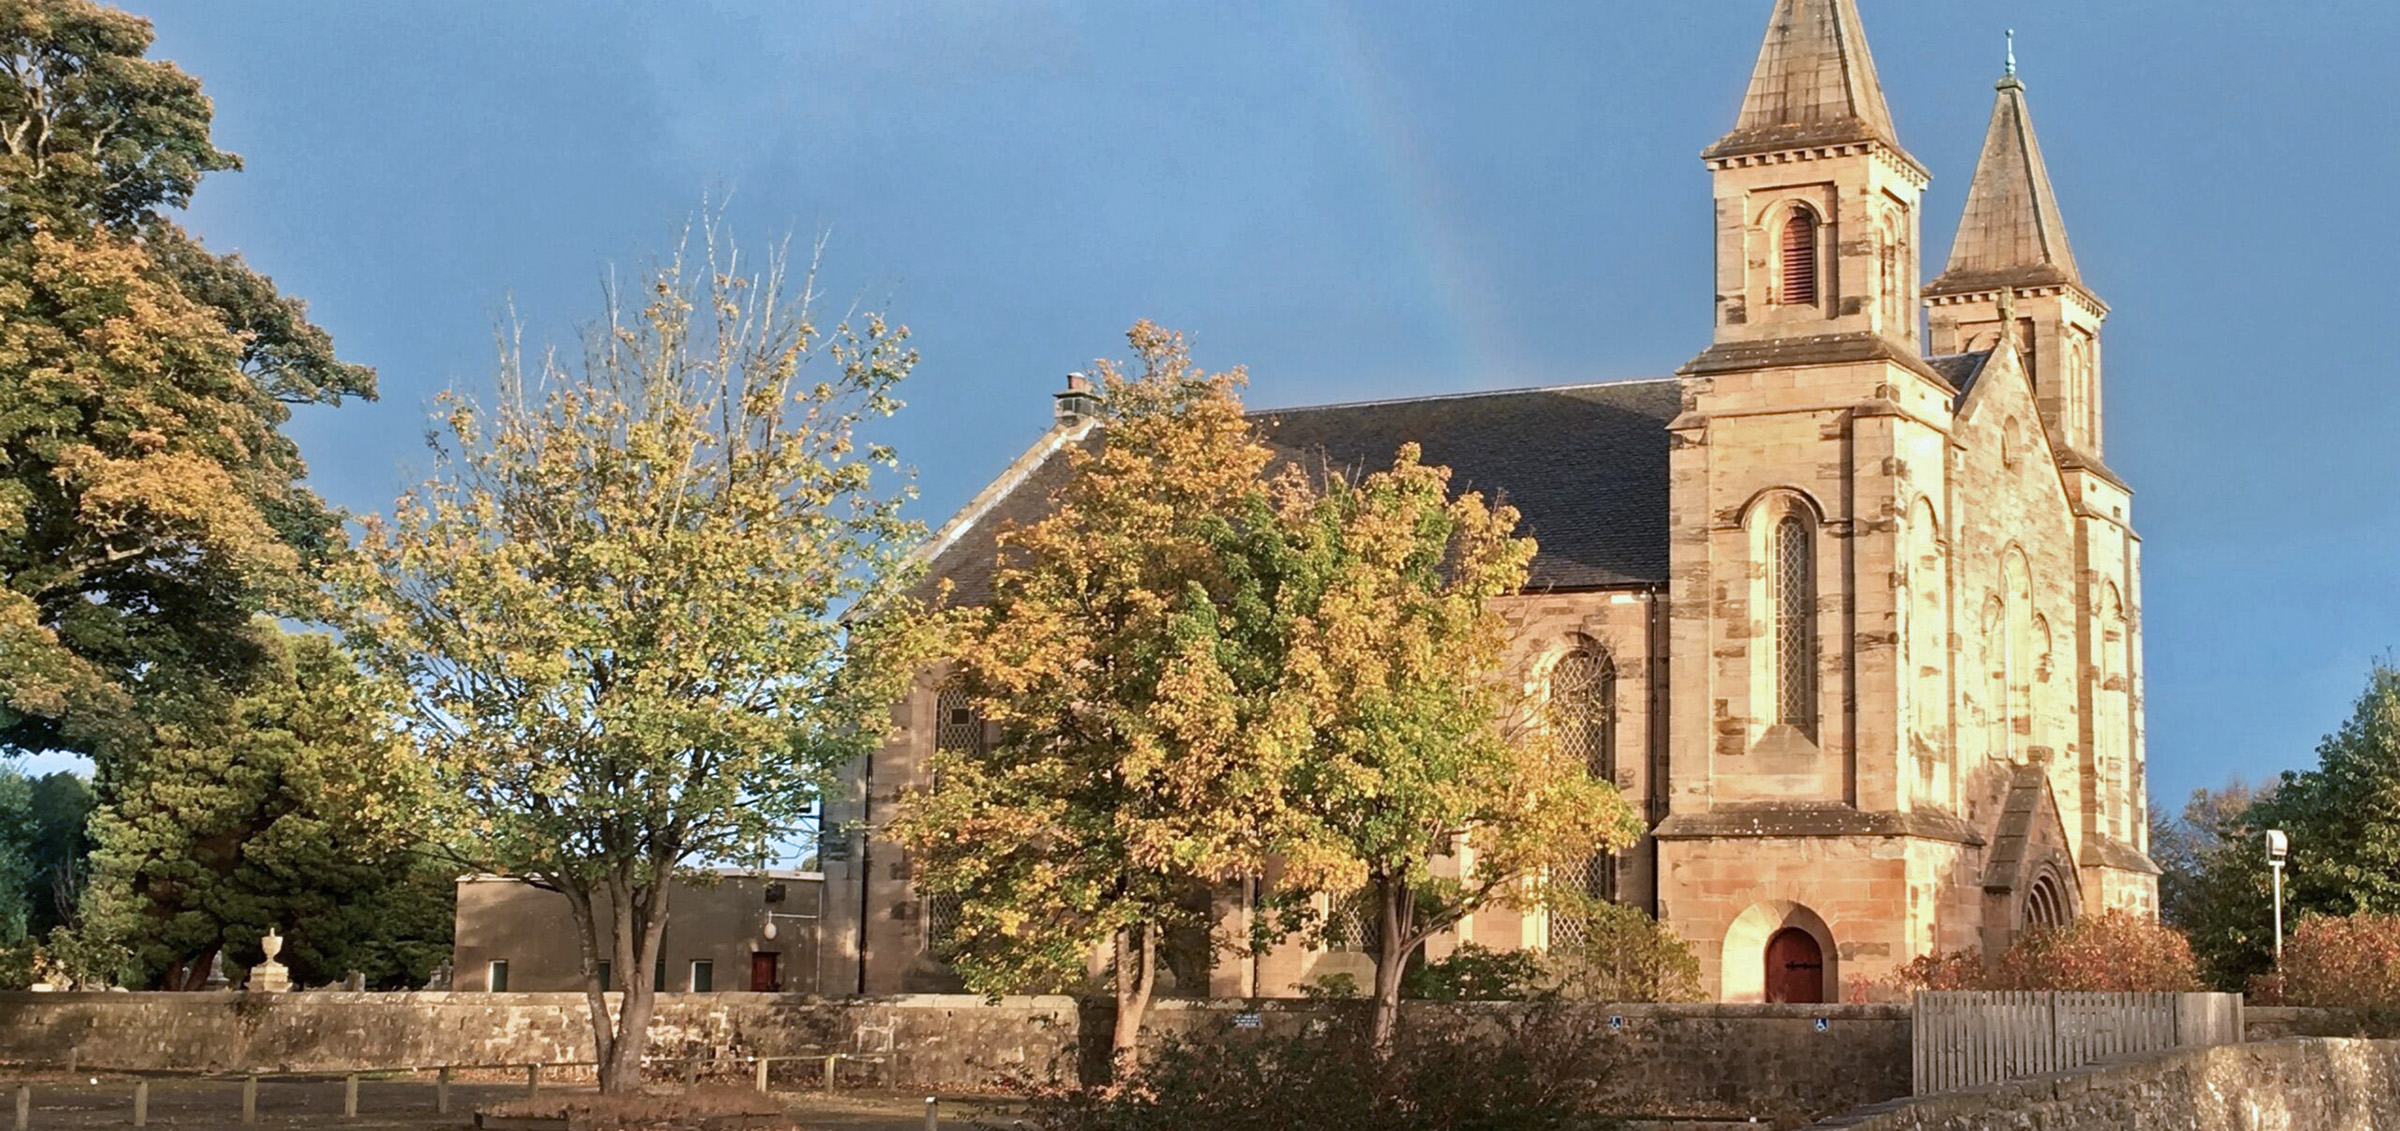 Polmont parish church viewed from road with rainbow in sky